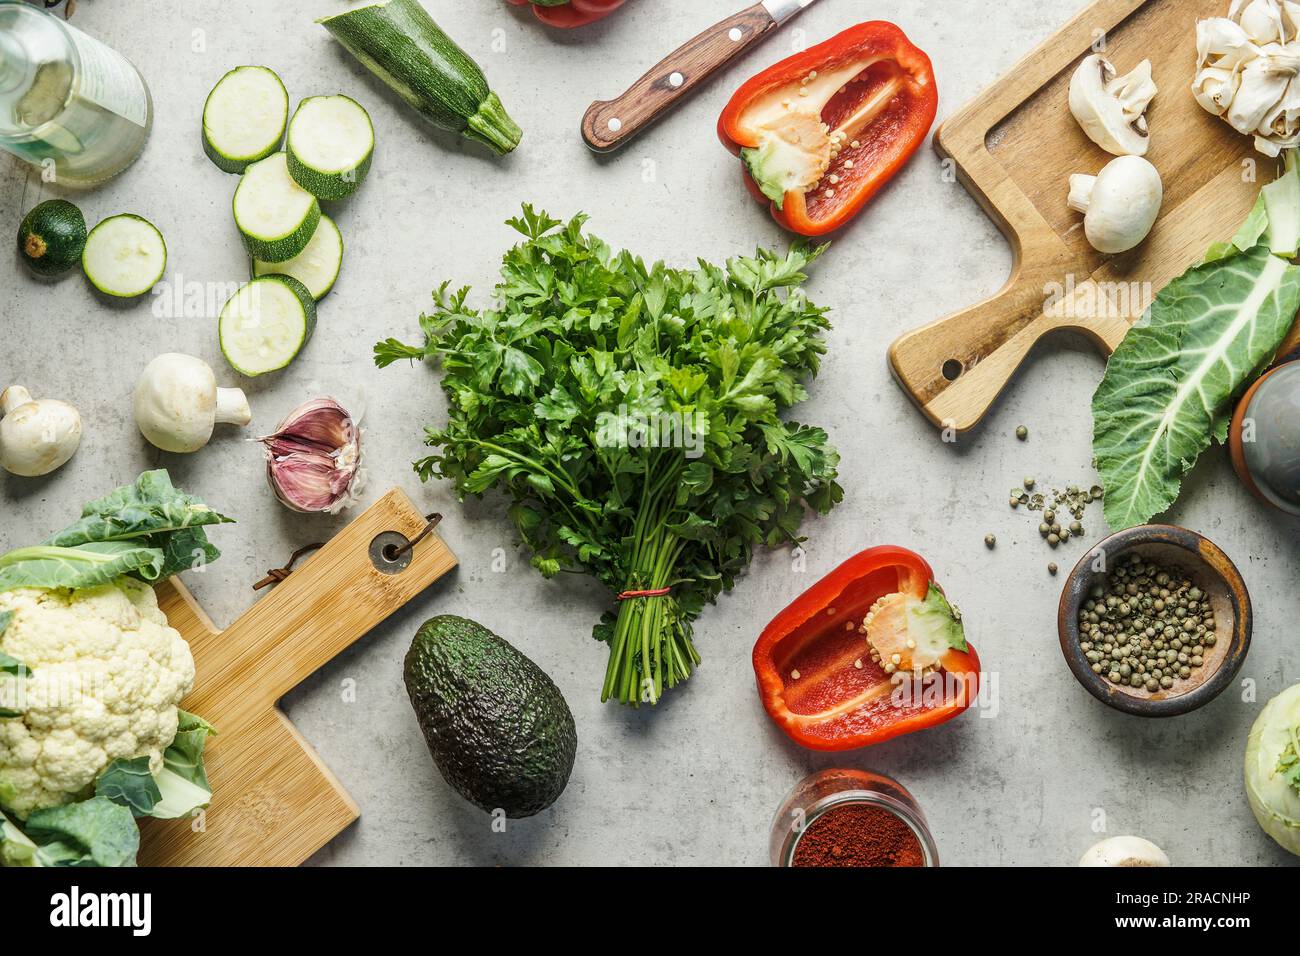 Healthy cooking and eating with fresh herbs and various vegetables ingredients on kitchen desk with knife and cutting board. Top view Stock Photo